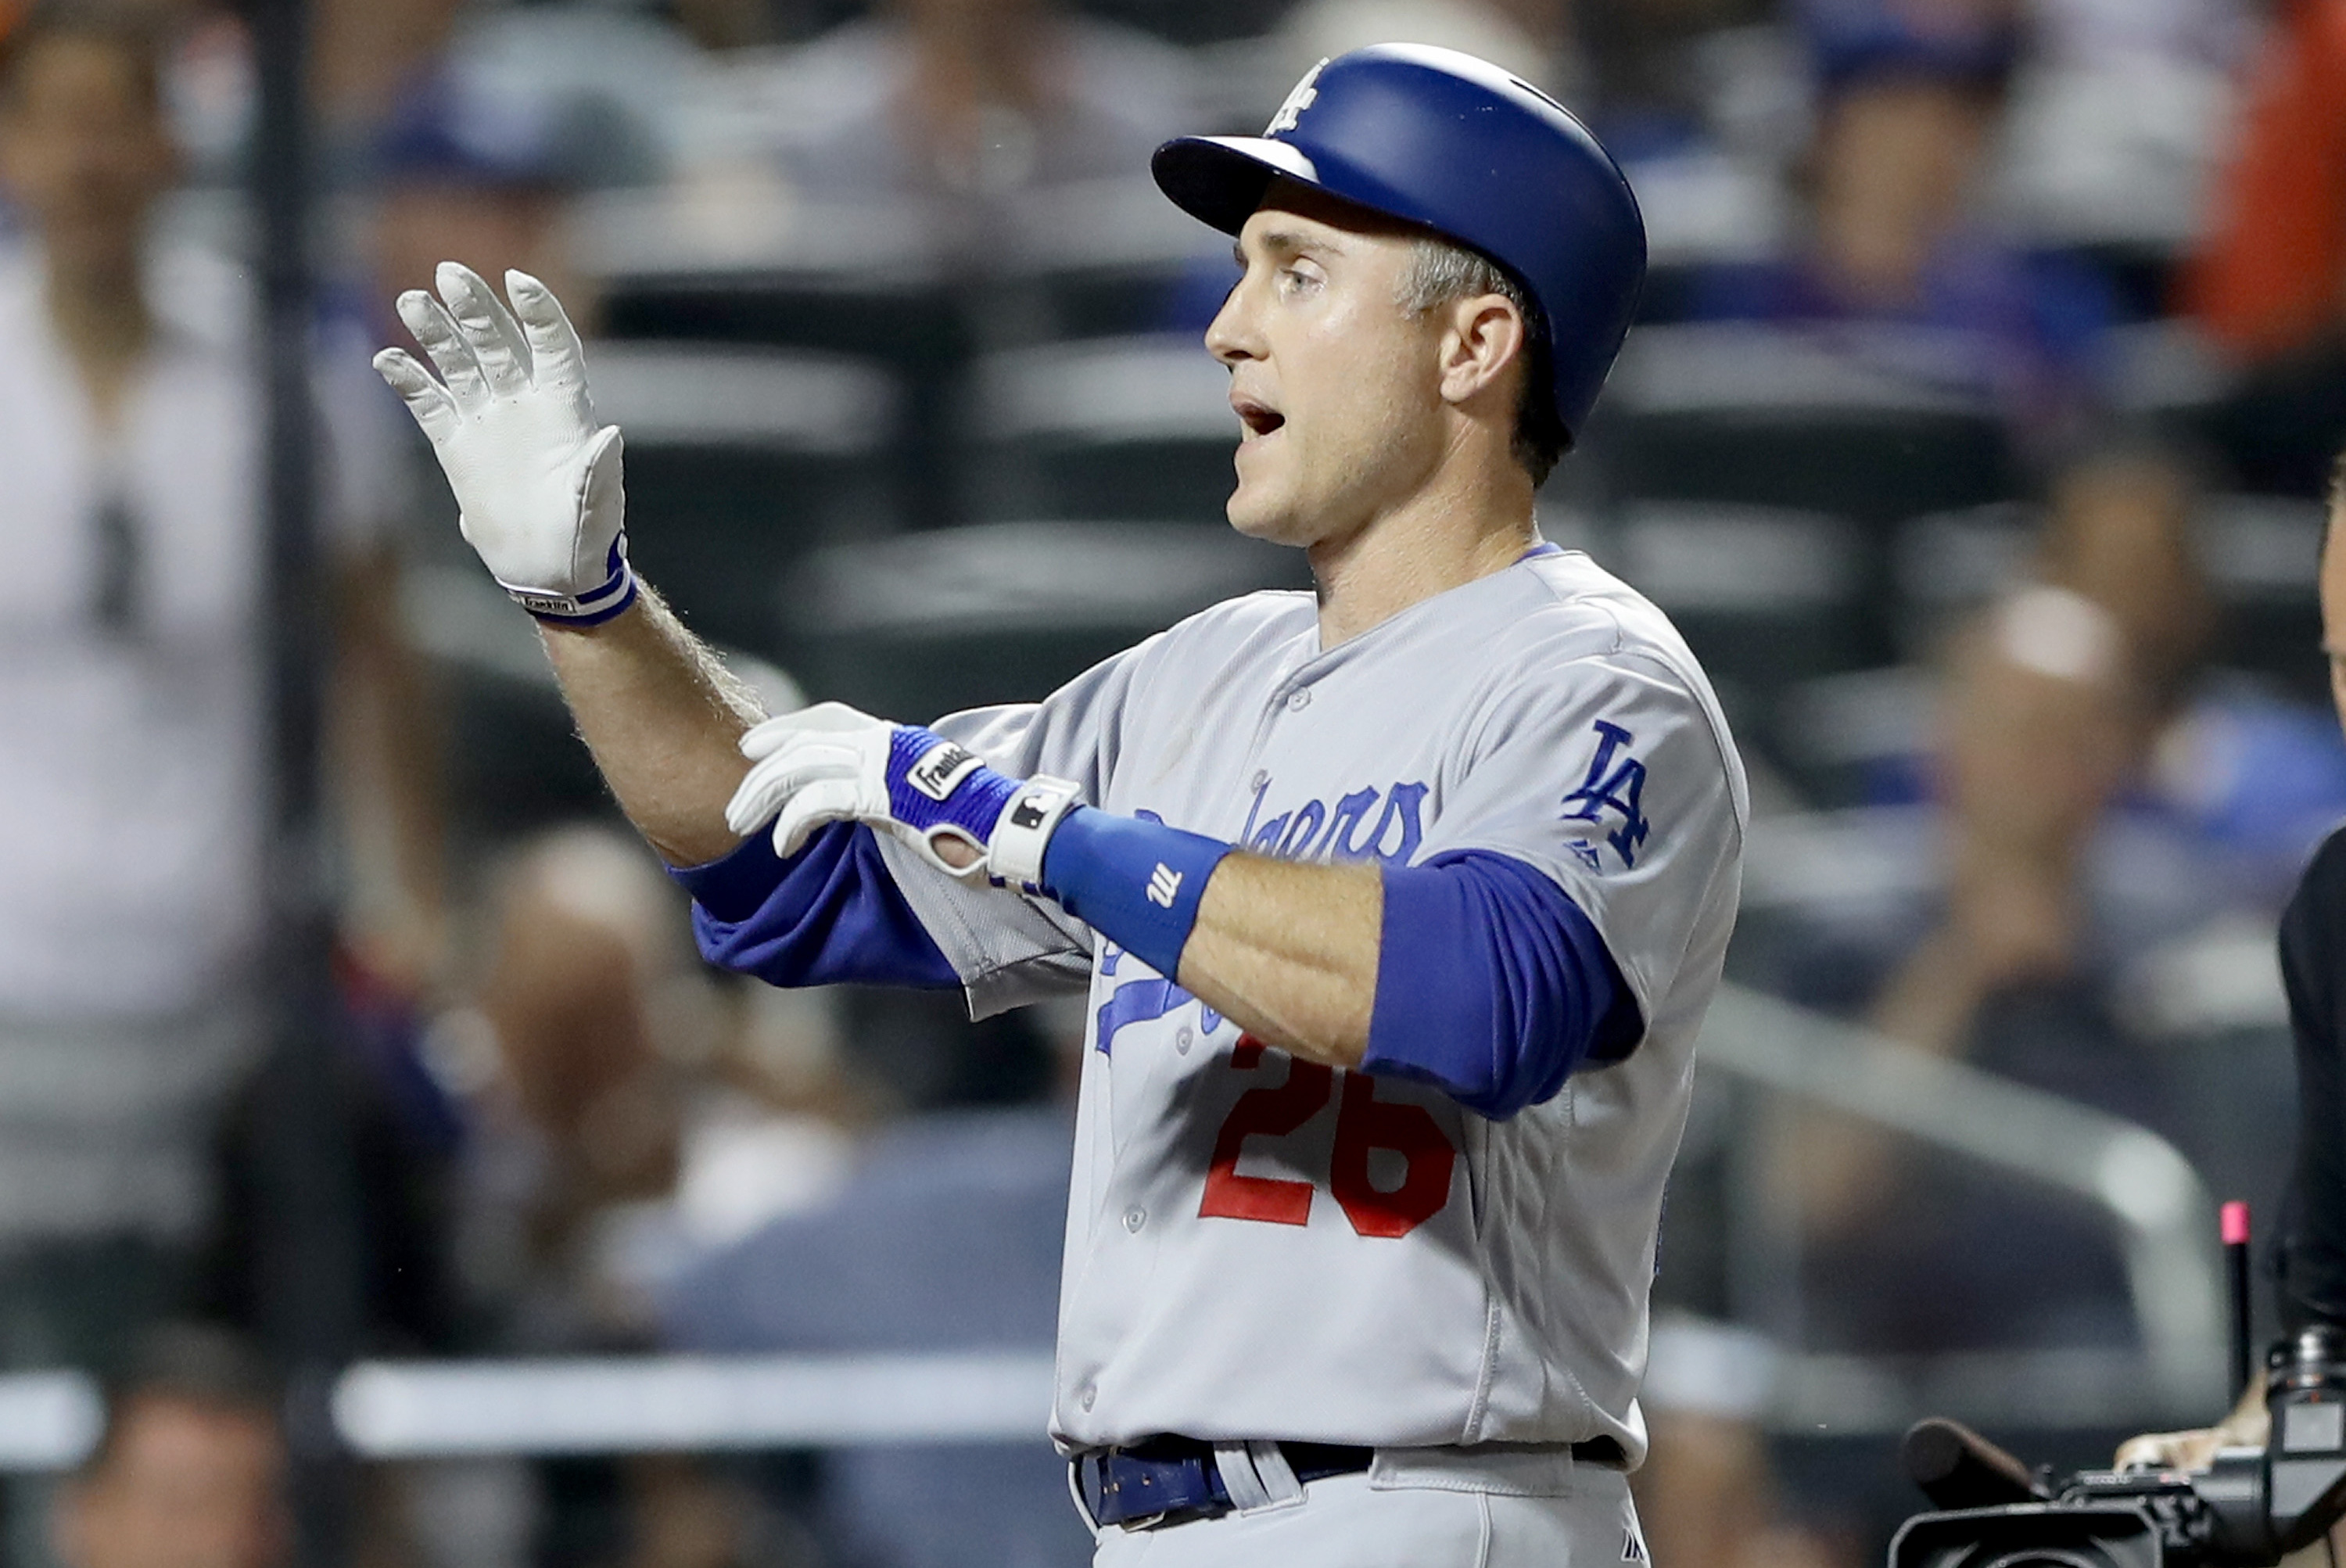 Chase Utley, Mets nemesis, set to return to Dodgers on one-year